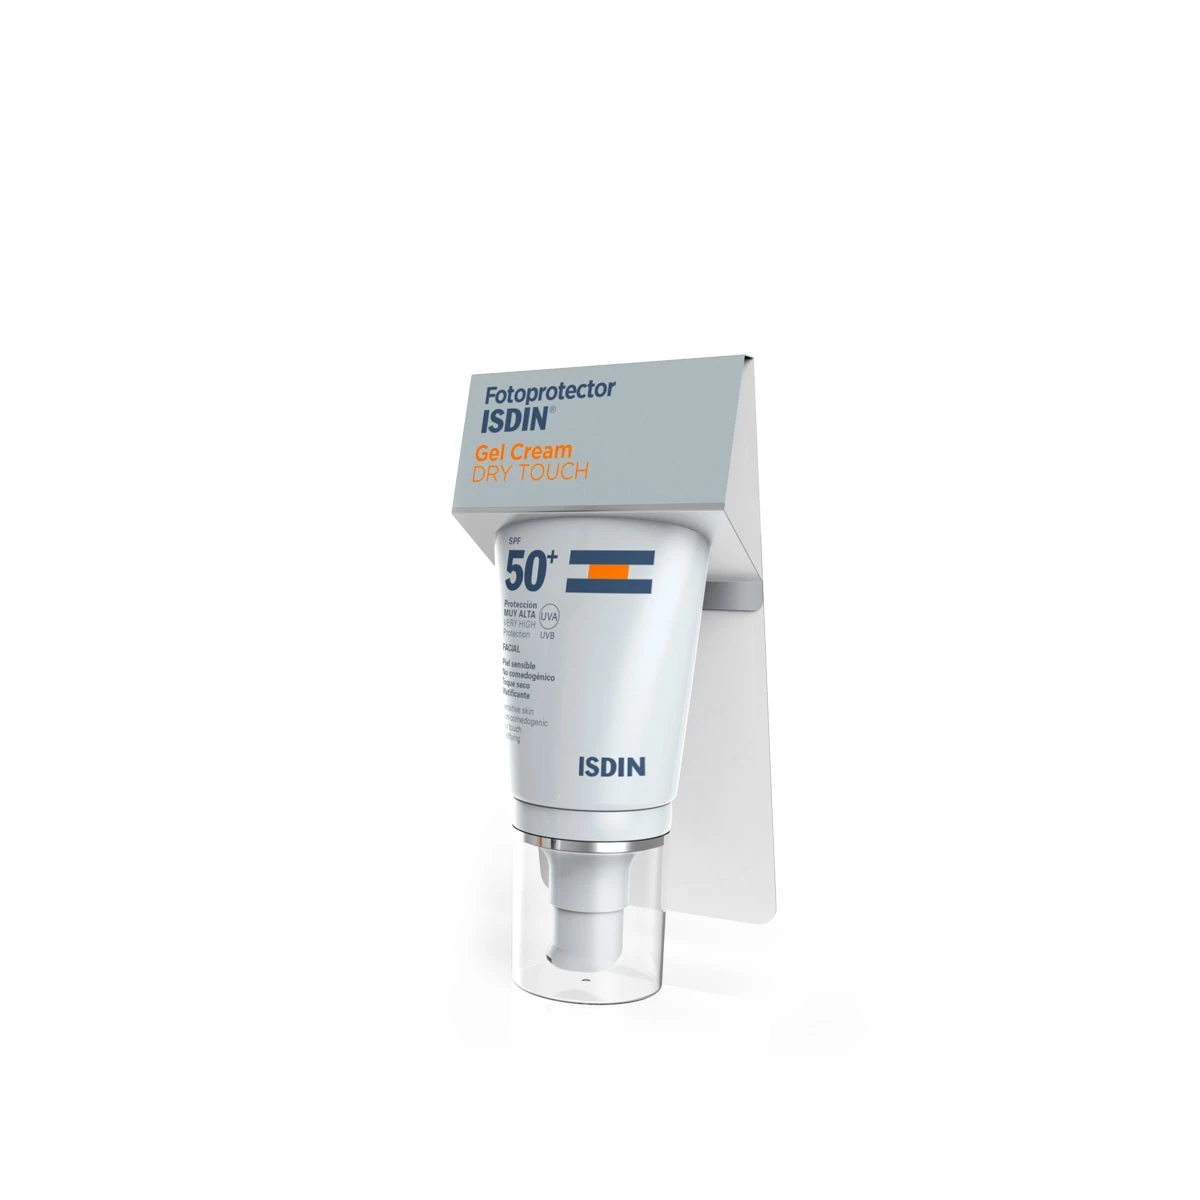 Fotoprotector Isdin Gel-Cream Dry Touch SPF50, 50ml